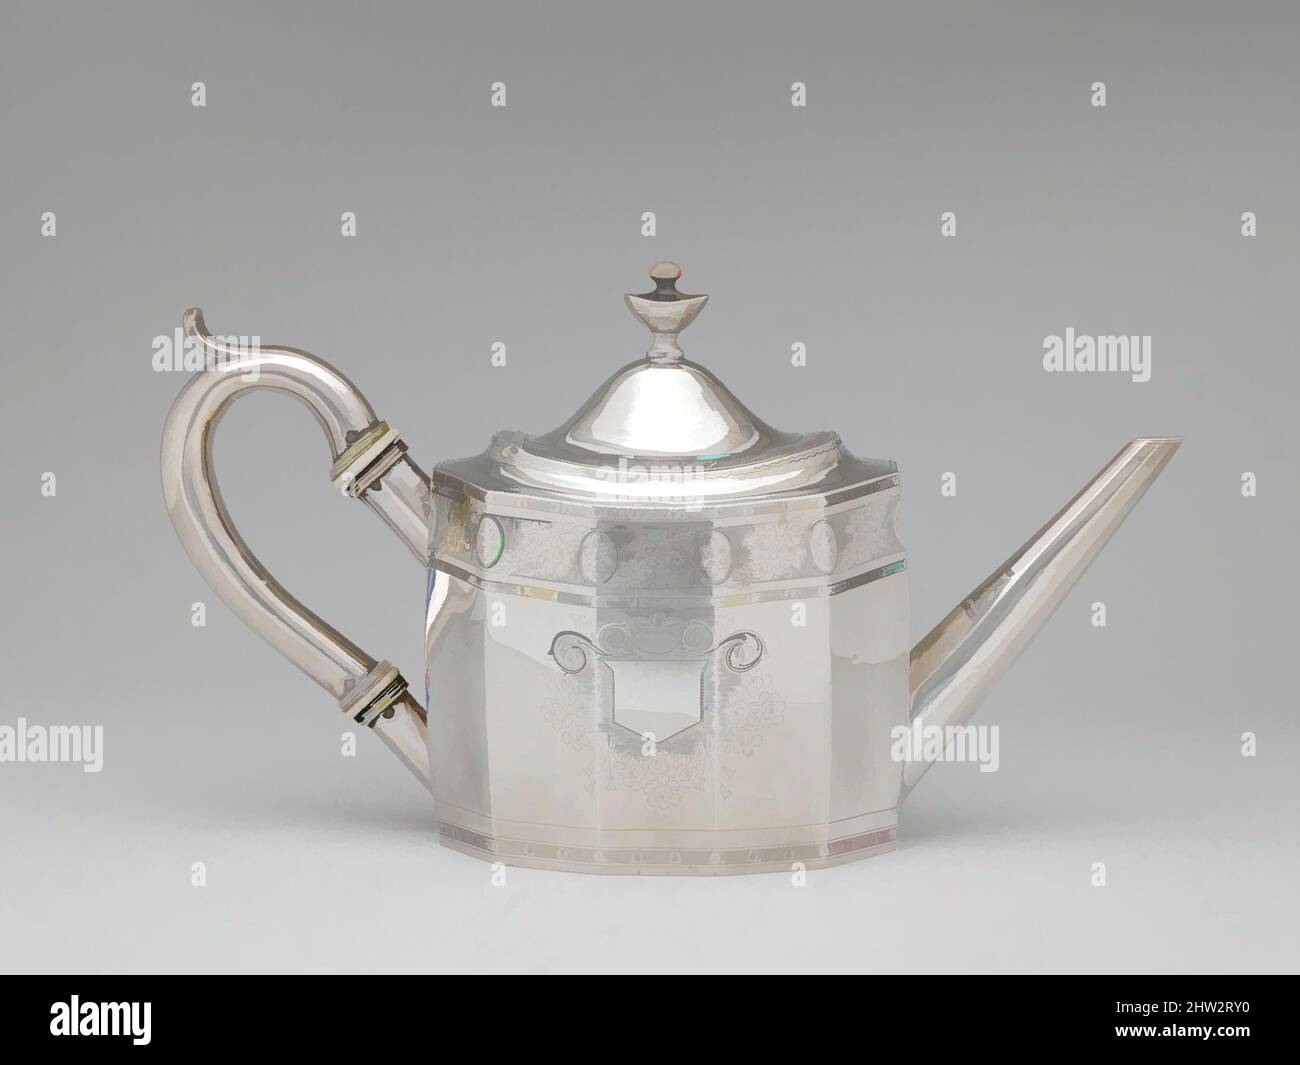 Art inspired by Teapot, ca. 1830, Made in Philadelphia, Pennsylvania, United States, American, Silver, 6 3/4 x 12 x 4 1/2 in. (17.1 x 30.5 x 11.4 cm) 22 oz. 6 dwt. (693.2 g), Silver, Robert and William Wilson (active ca. 1825–ca6, Classic works modernized by Artotop with a splash of modernity. Shapes, color and value, eye-catching visual impact on art. Emotions through freedom of artworks in a contemporary way. A timeless message pursuing a wildly creative new direction. Artists turning to the digital medium and creating the Artotop NFT Stock Photo